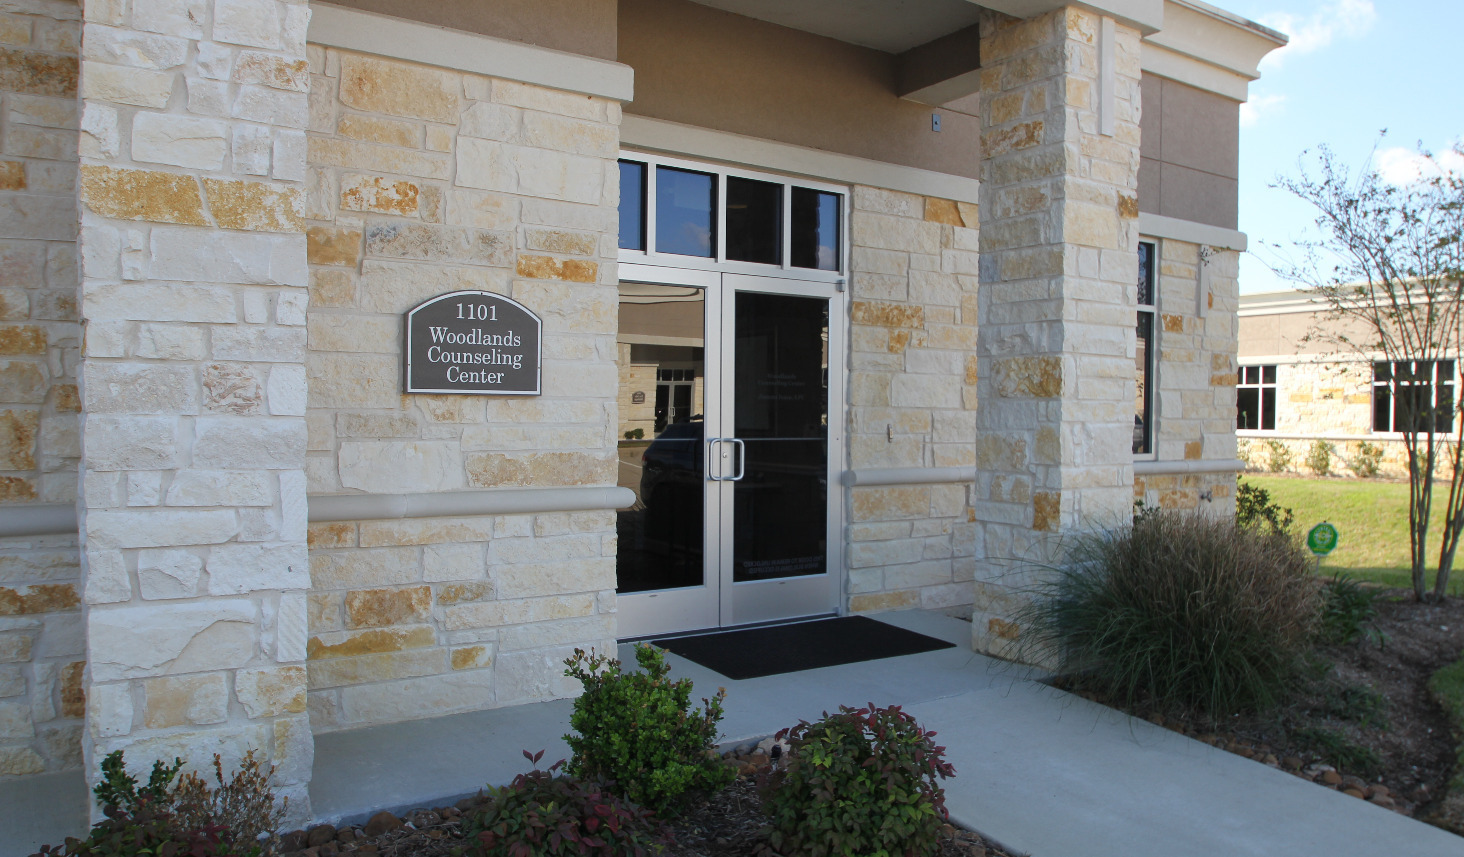 Gallery Photo of Office entrance